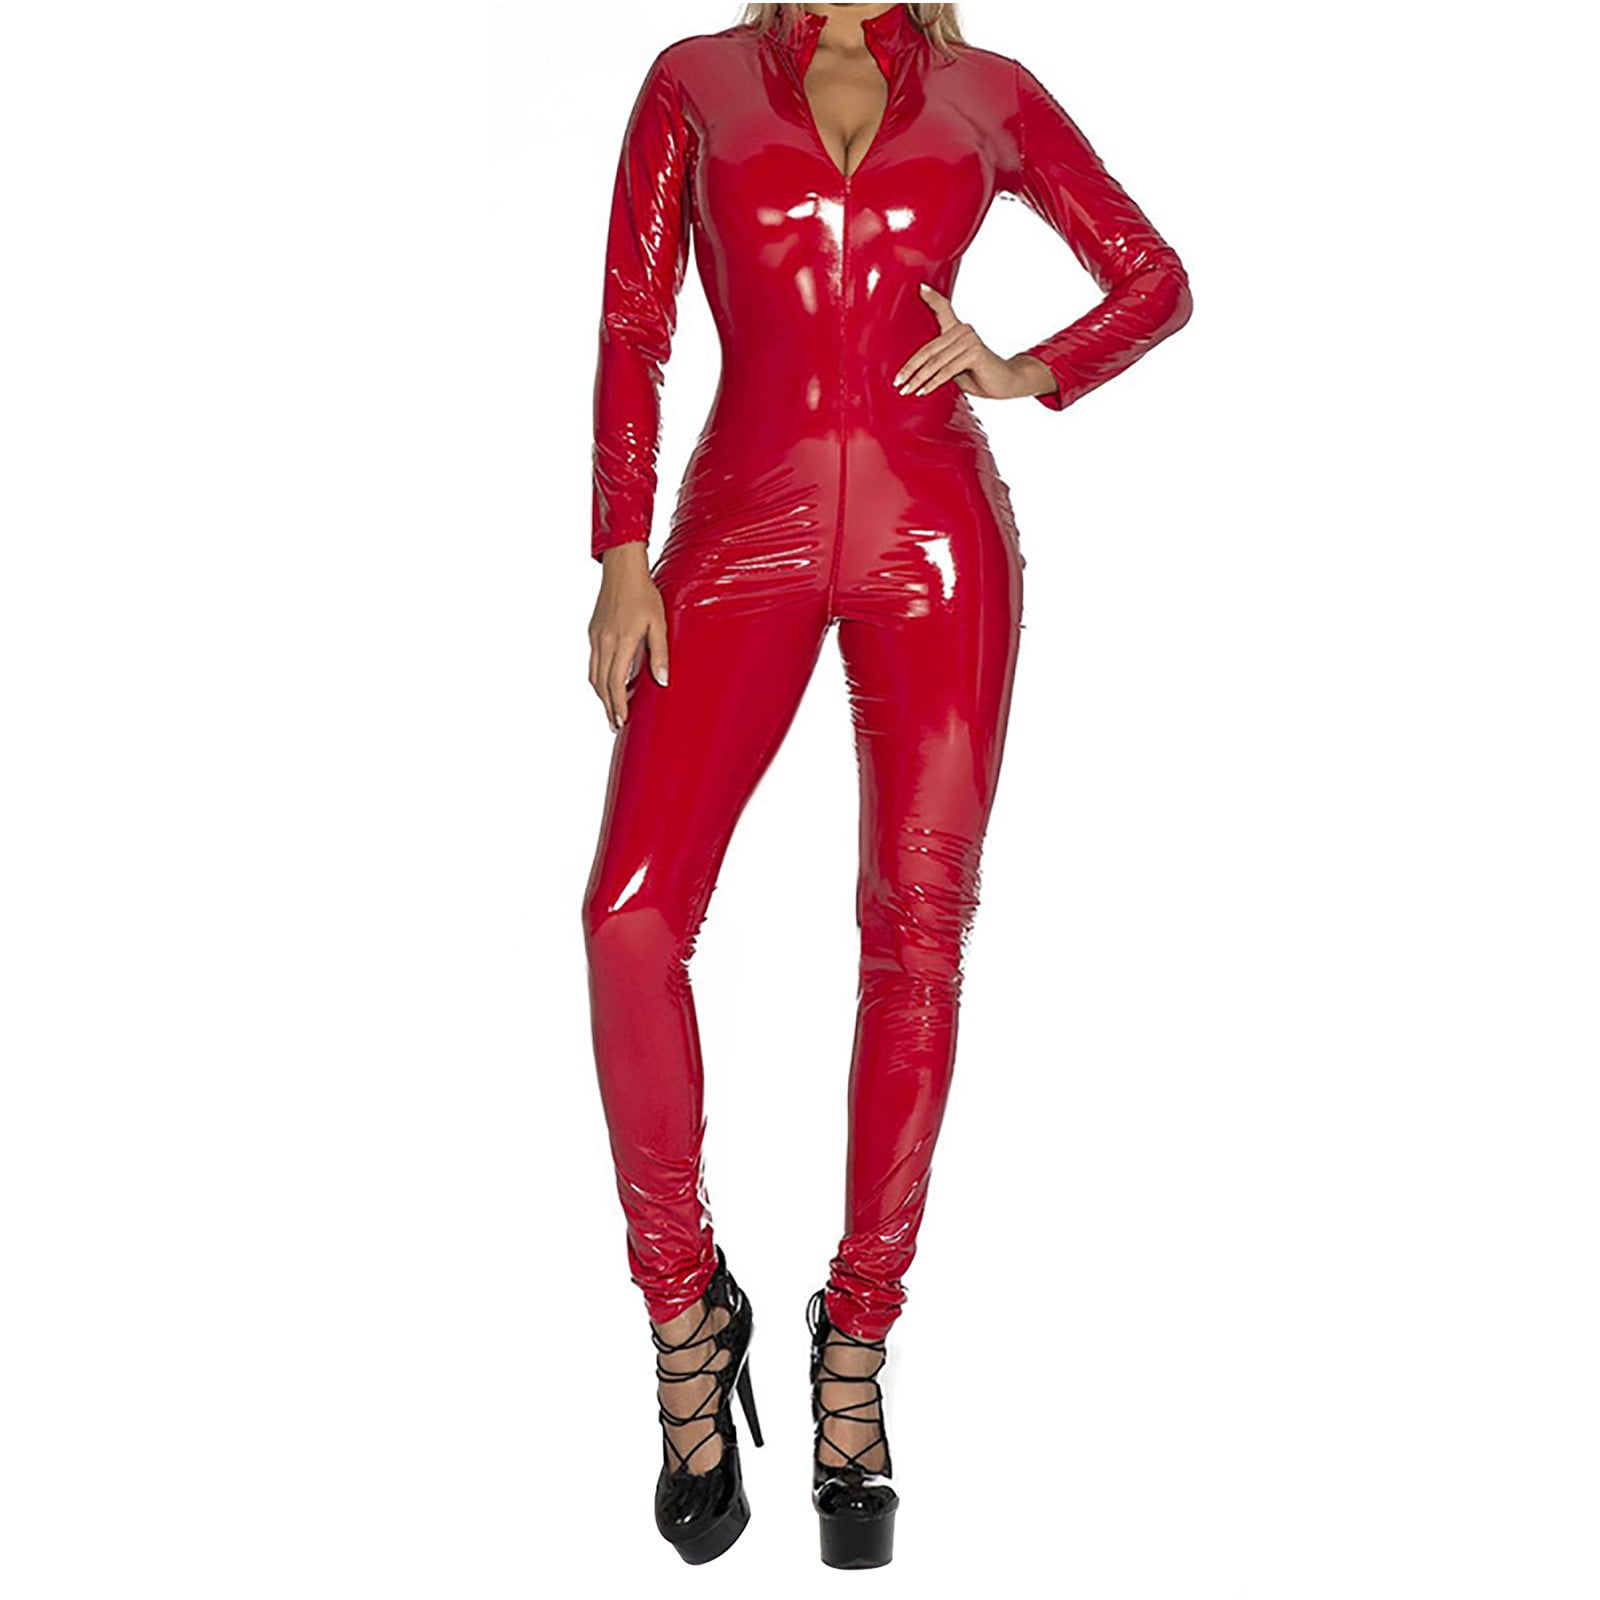 WGOUP Women's Leather Bodysuit Latex Overall Catsuit Sexy Jumpsuit Full Body  Suit Long Sleeve Body Leggings Erotic Lingerie Clubwear,Red 